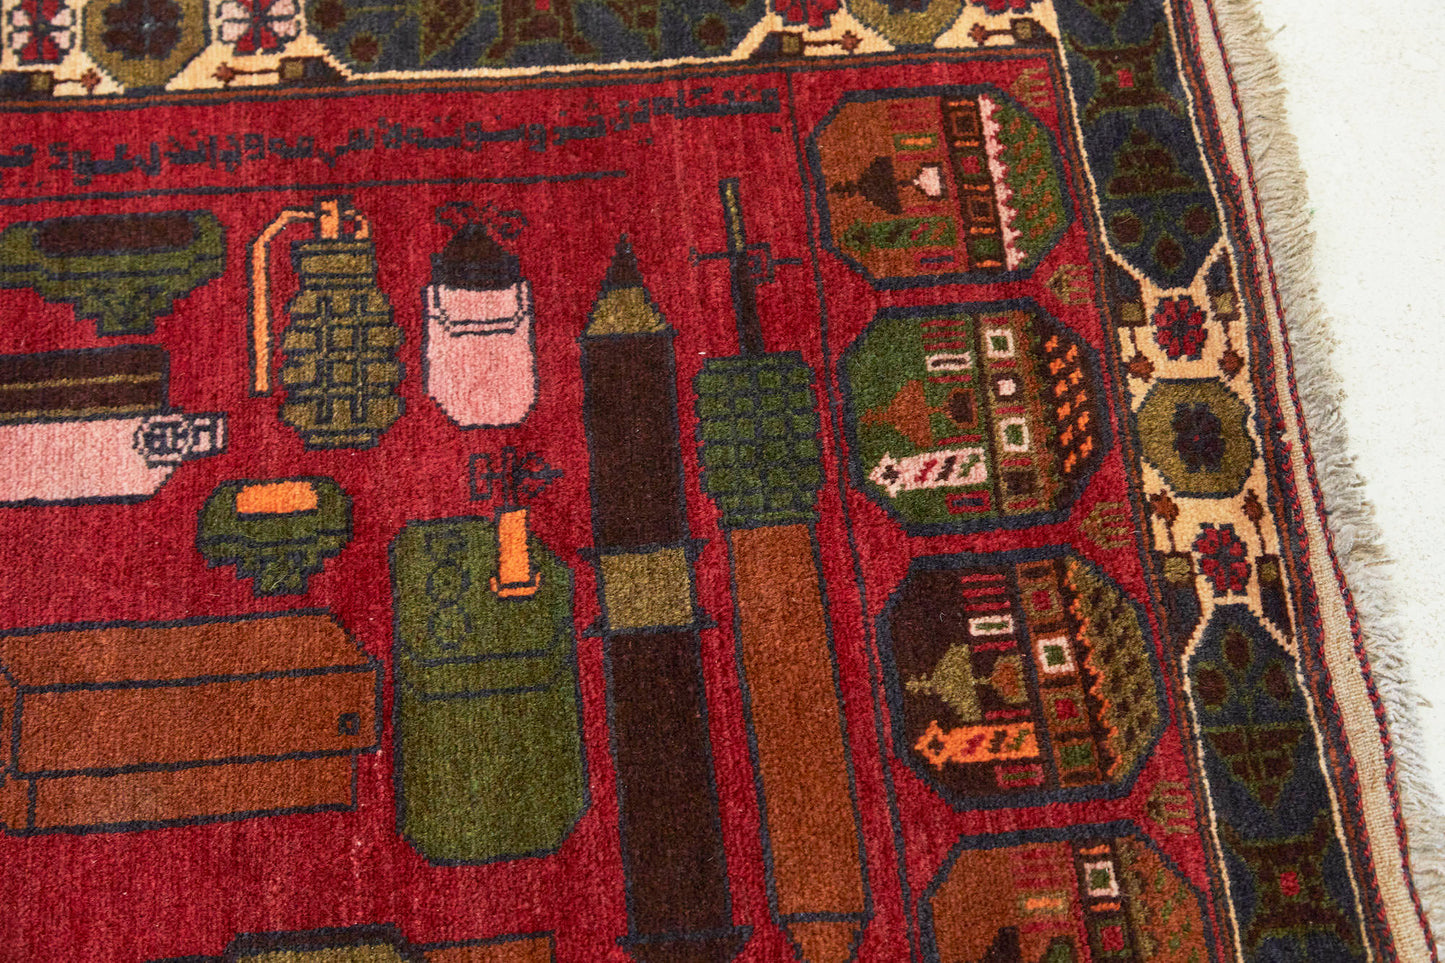 Details of Afghan hand woven "Unexploded Ordinance" rug, with deep red base, and green, yellow, tan and cream images depicting weapons, buildings and flowers - Available from King Kennedy Rugs Los Angeles